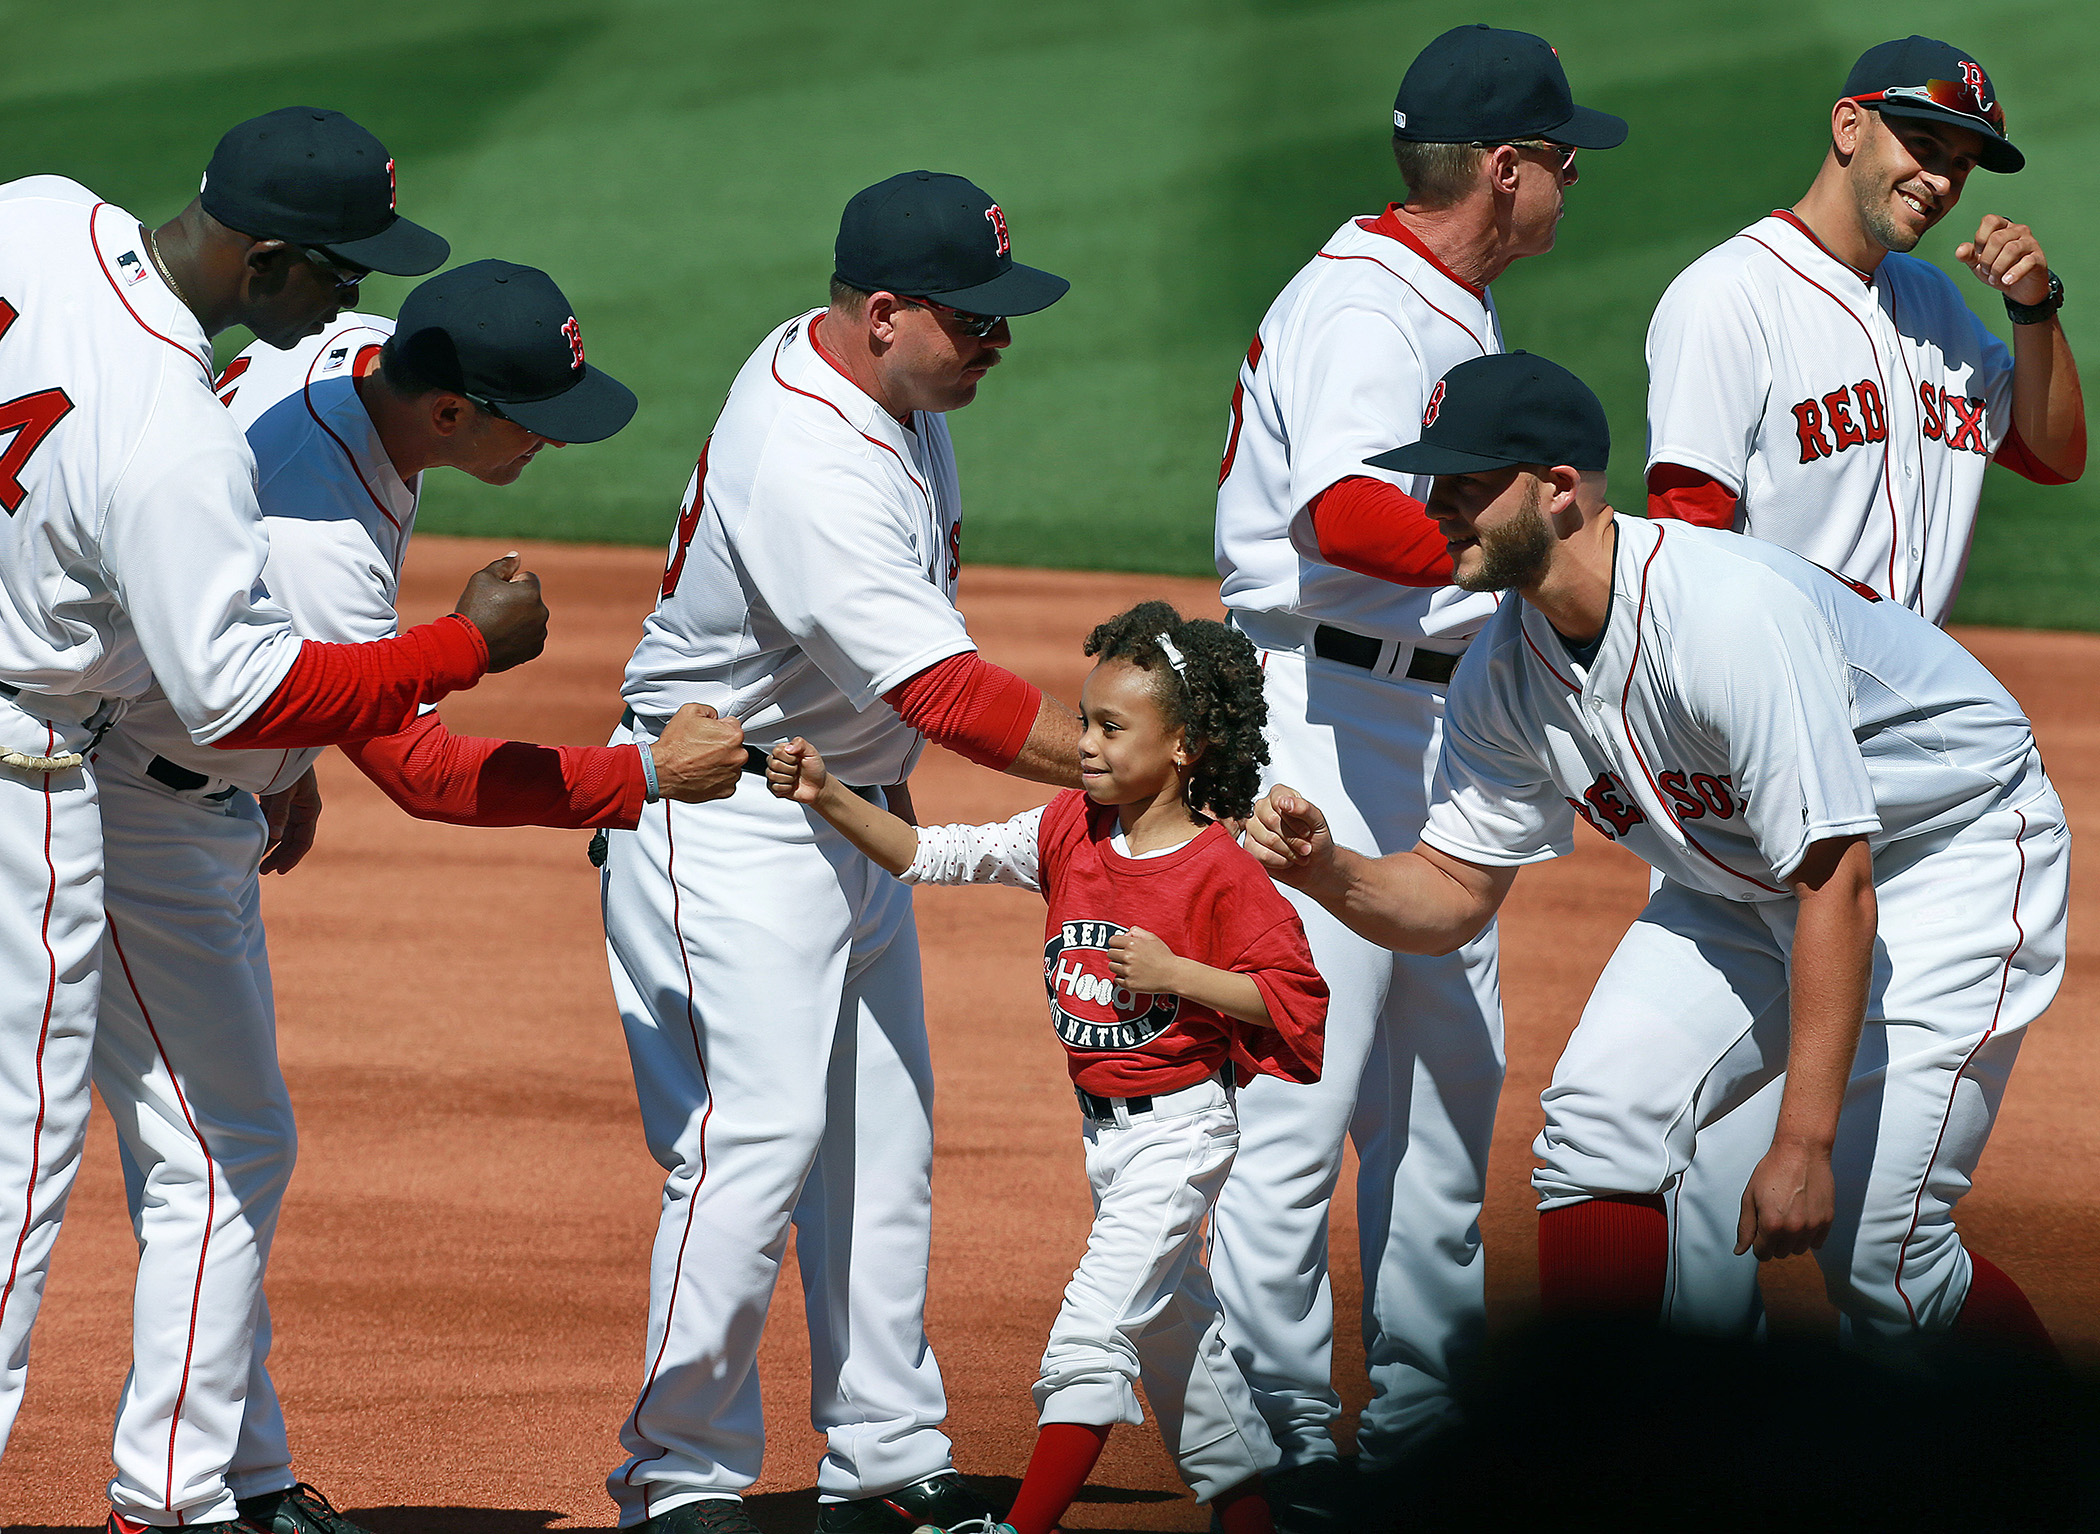 As part of a season-long program titled  Calling All Kids , the players of the Boston Red Sox were accompanied by children during pre-game introductions.